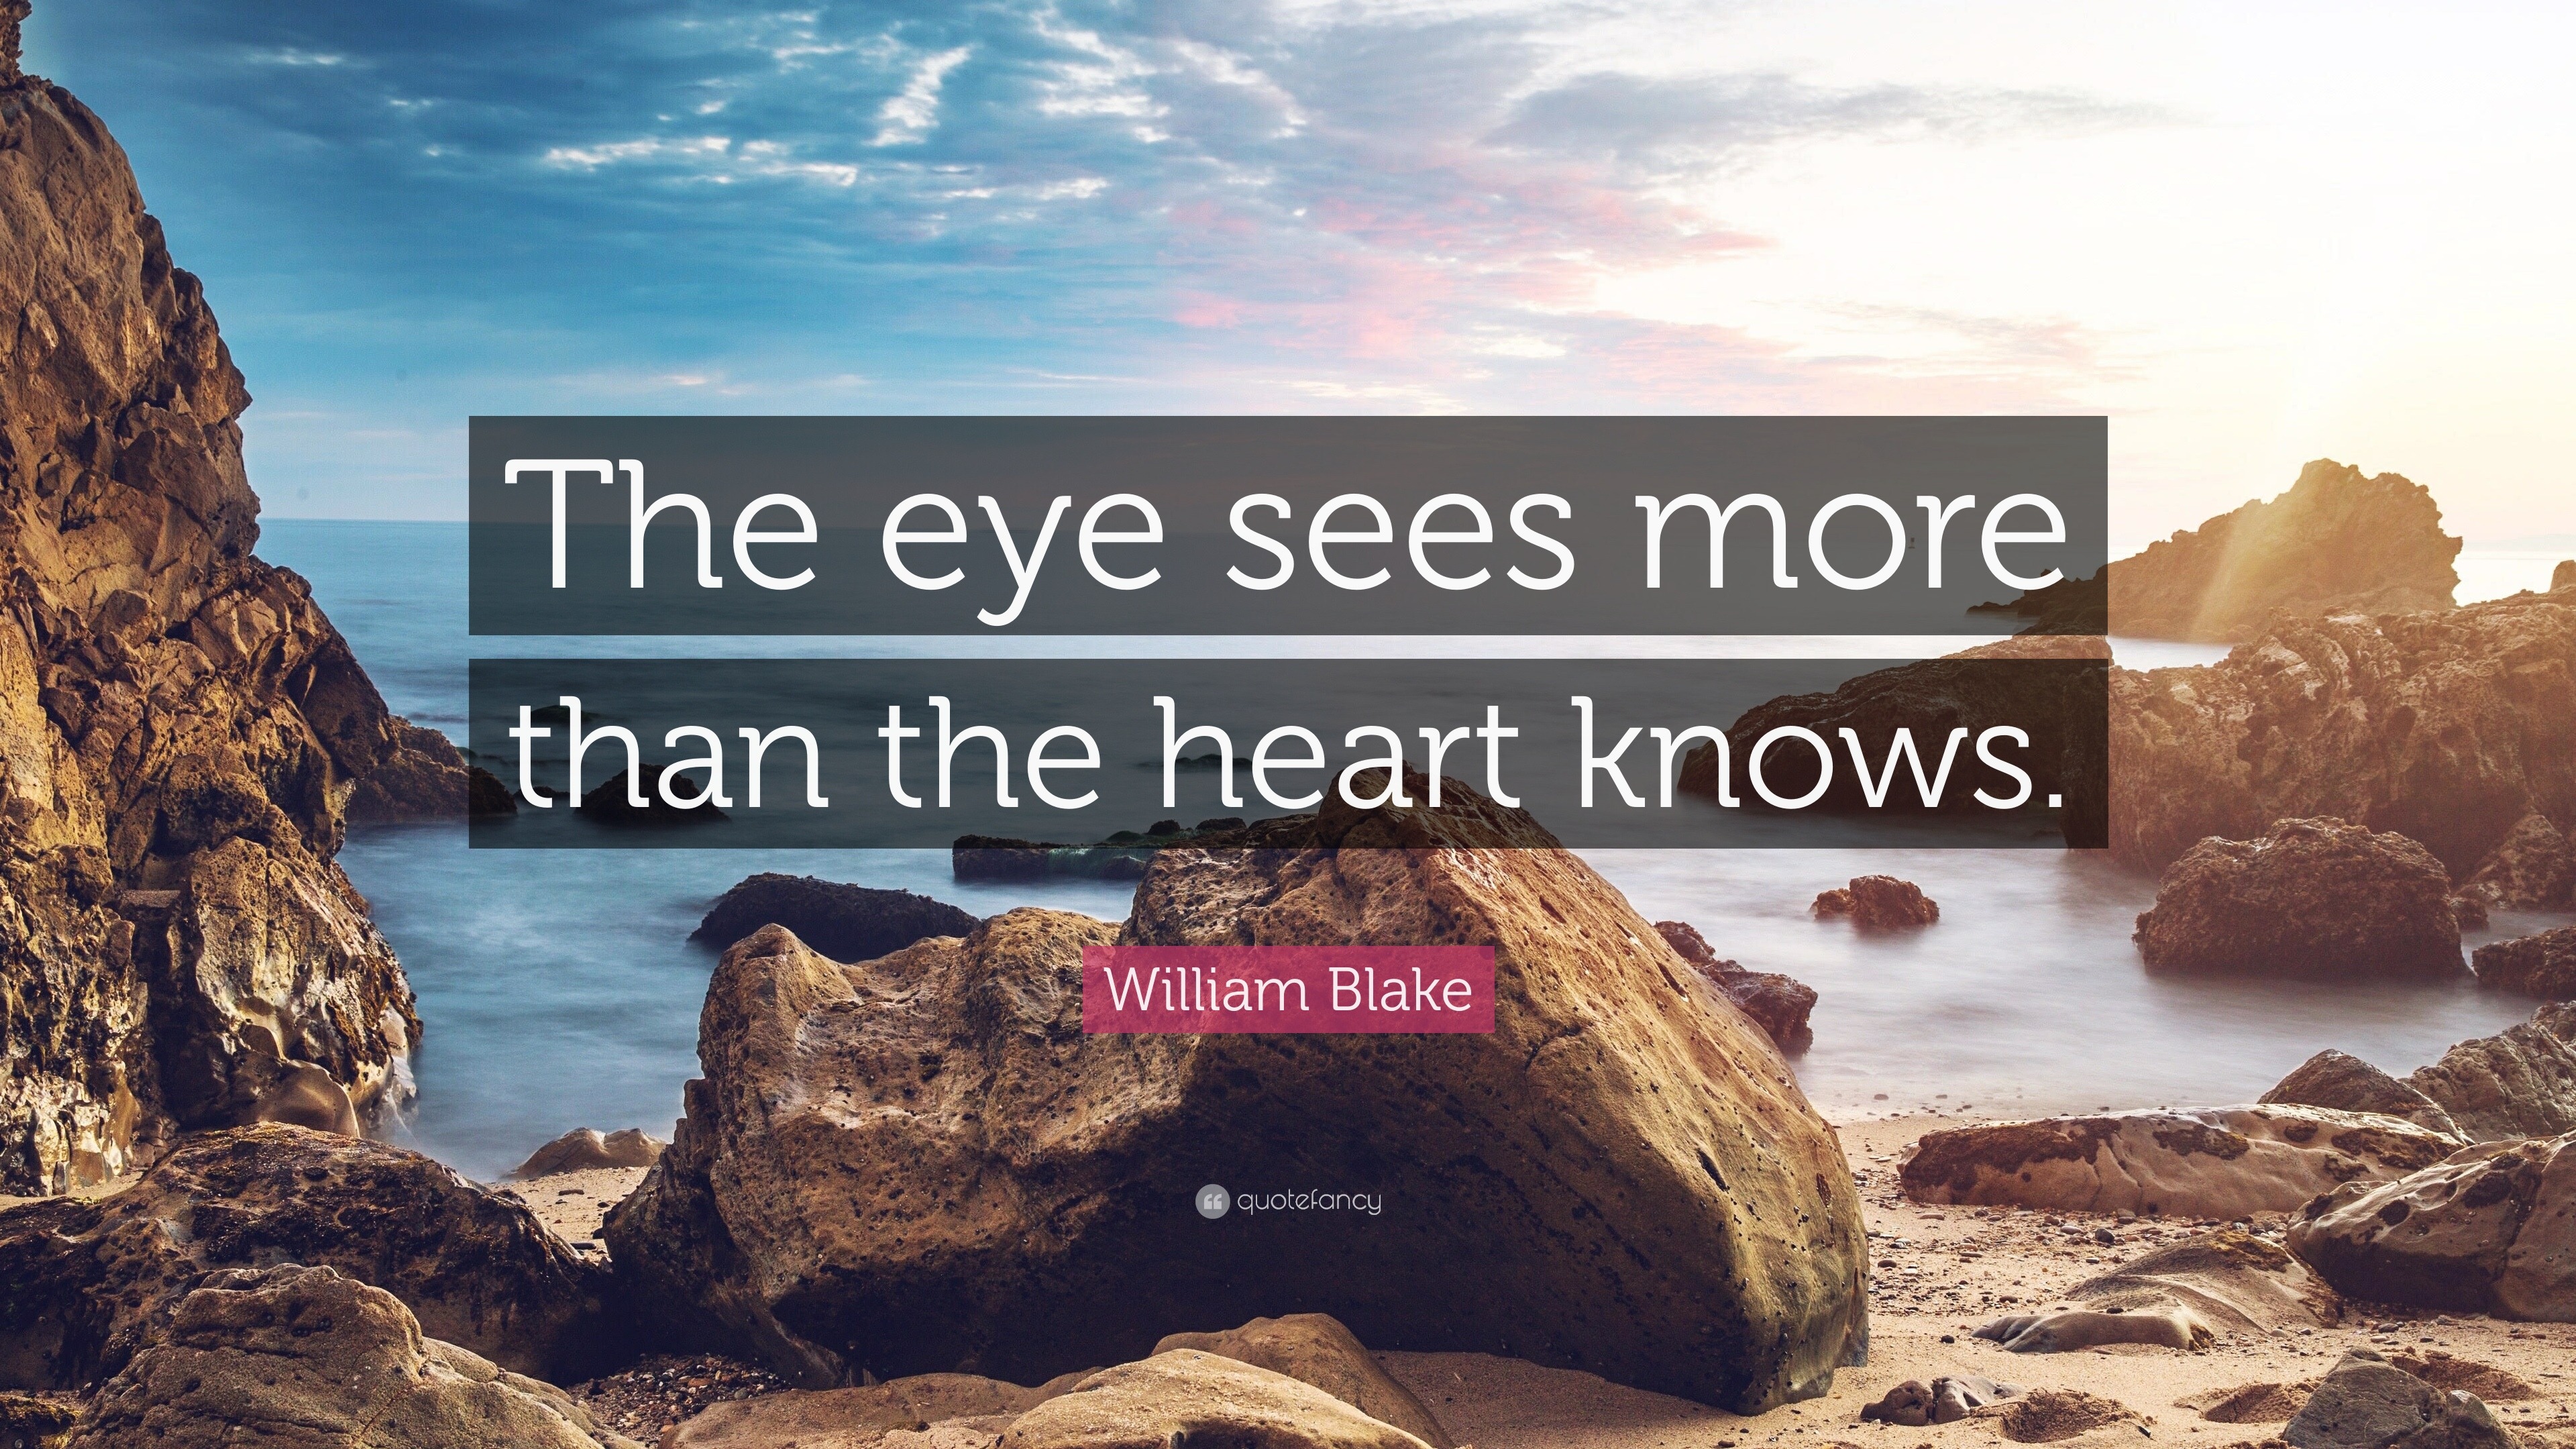 William Blake Quote: “The eye sees more than the heart knows.”